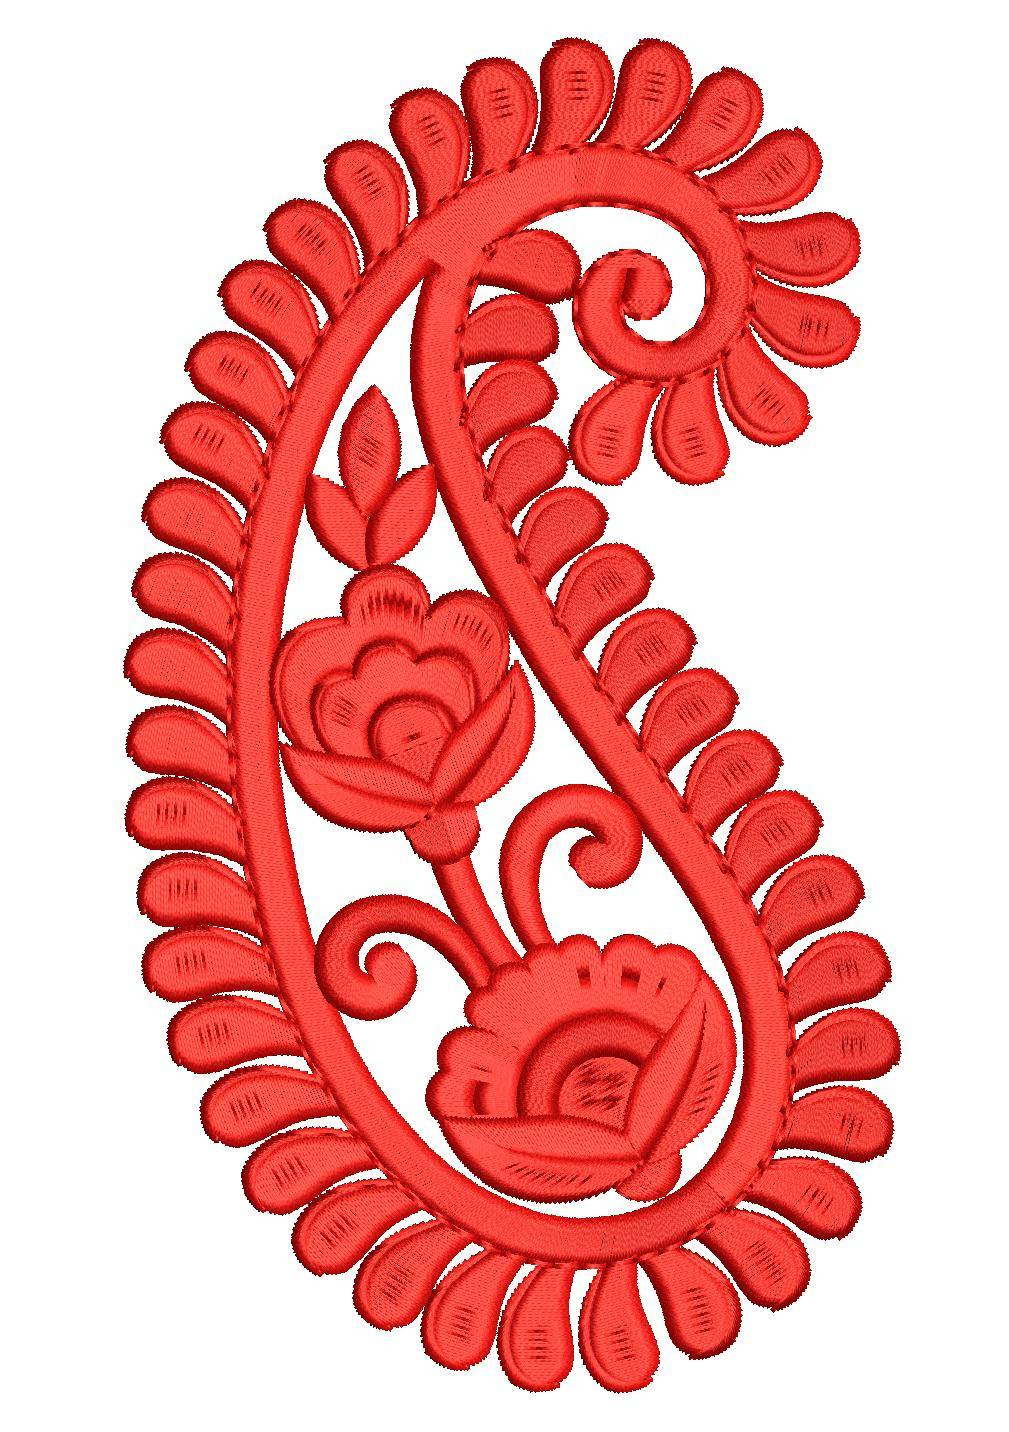 Paisley Embroidery Patterns Simple Paisley Embroidery Design